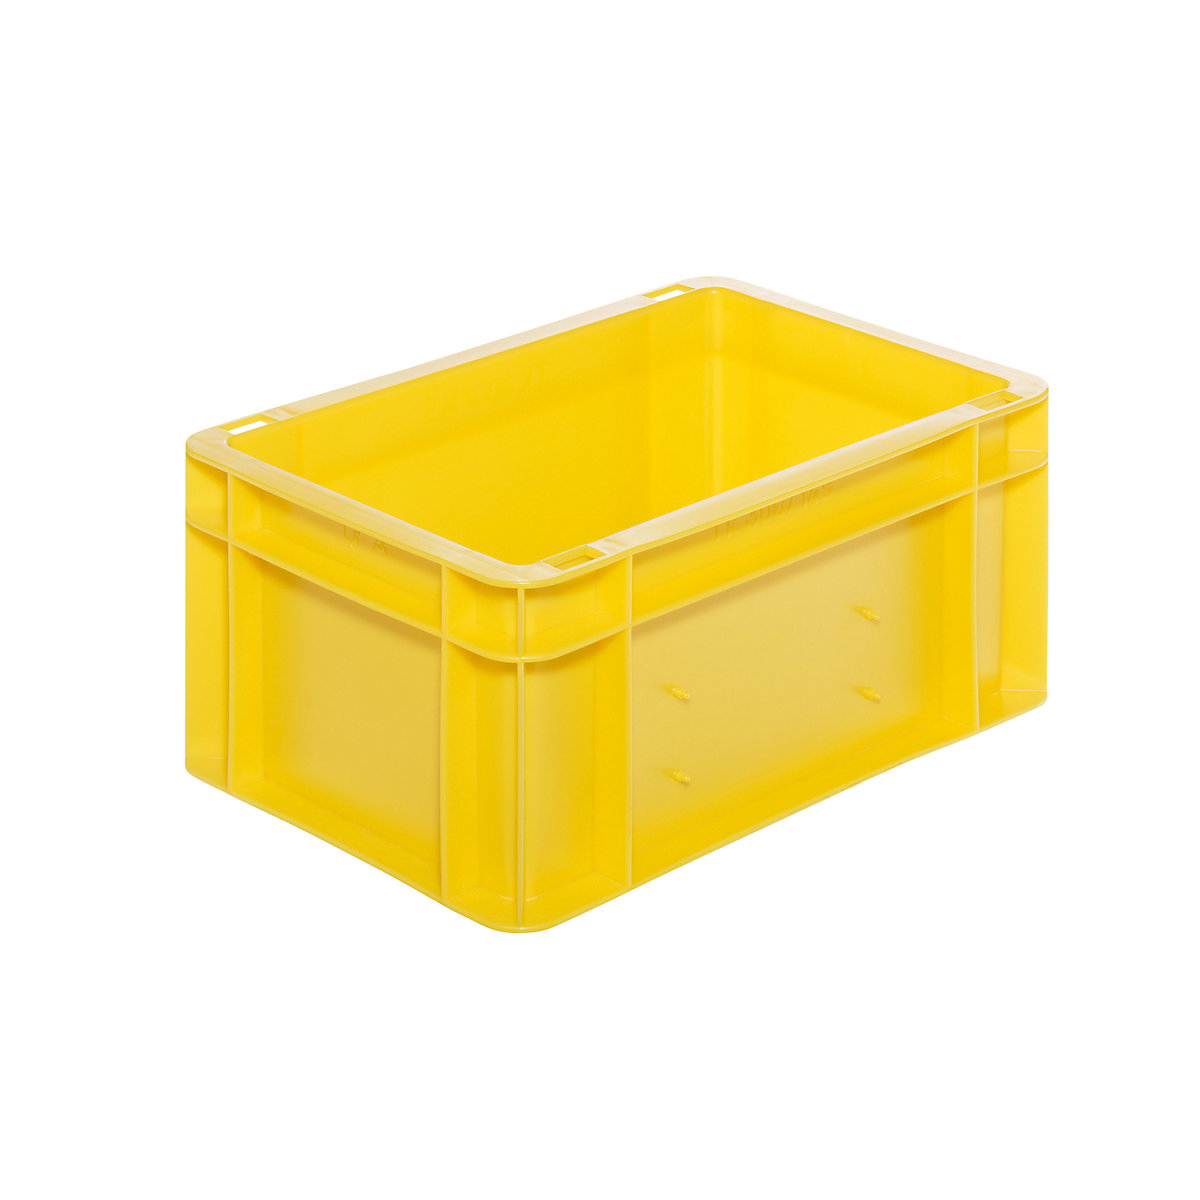 Euro stacking container, closed walls and base, LxWxH 300 x 200 x 145 mm, yellow, pack of 5